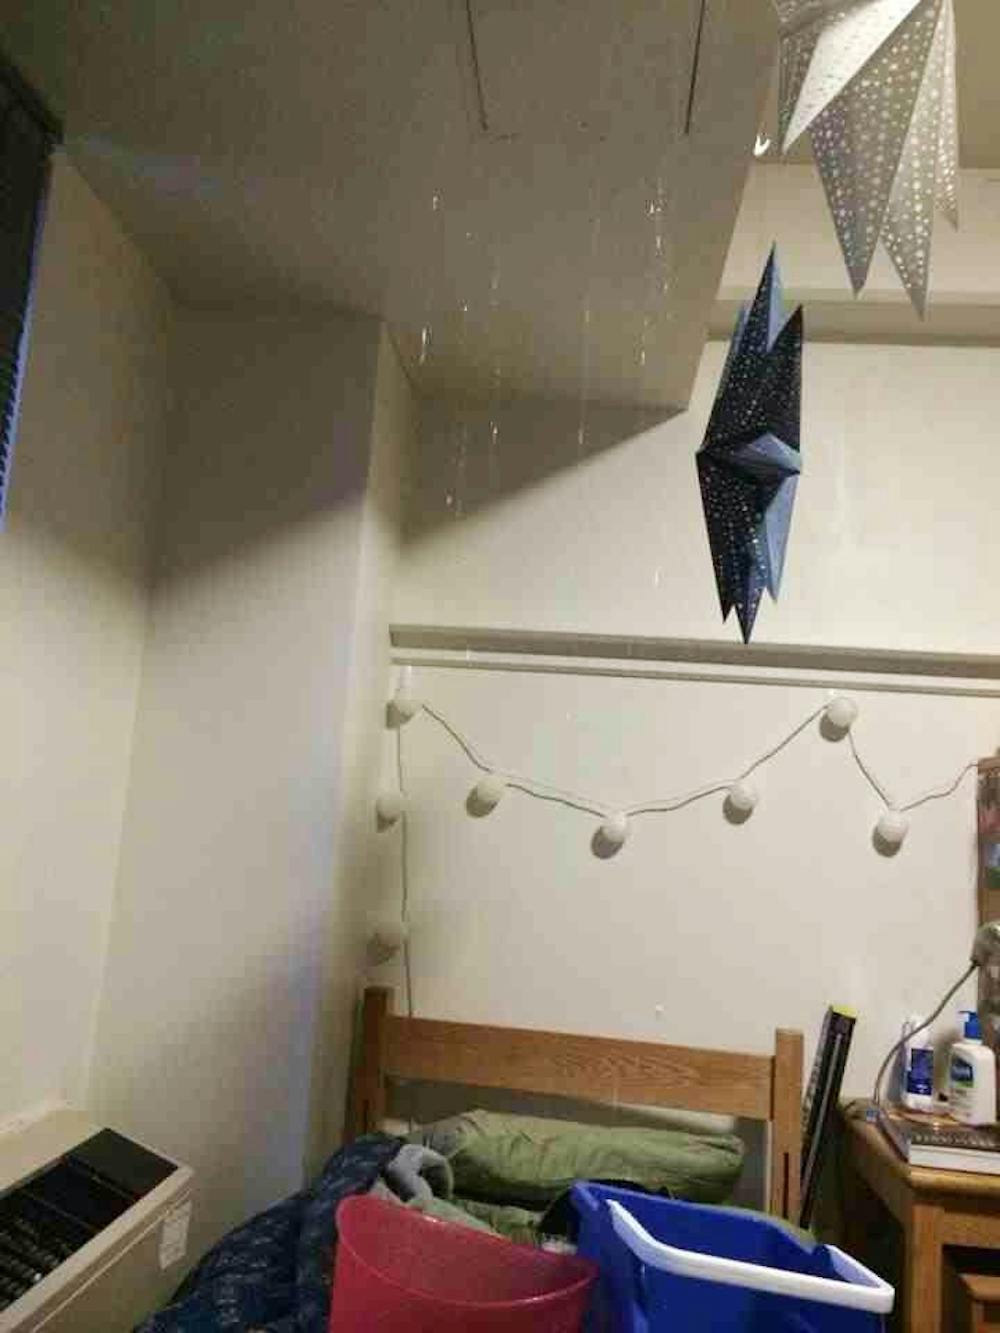 <p>A pipe that had burst behind a wall led <strong>Silberling</strong> and other students to collect the water accumulating in their dorm rooms in buckets.</p>